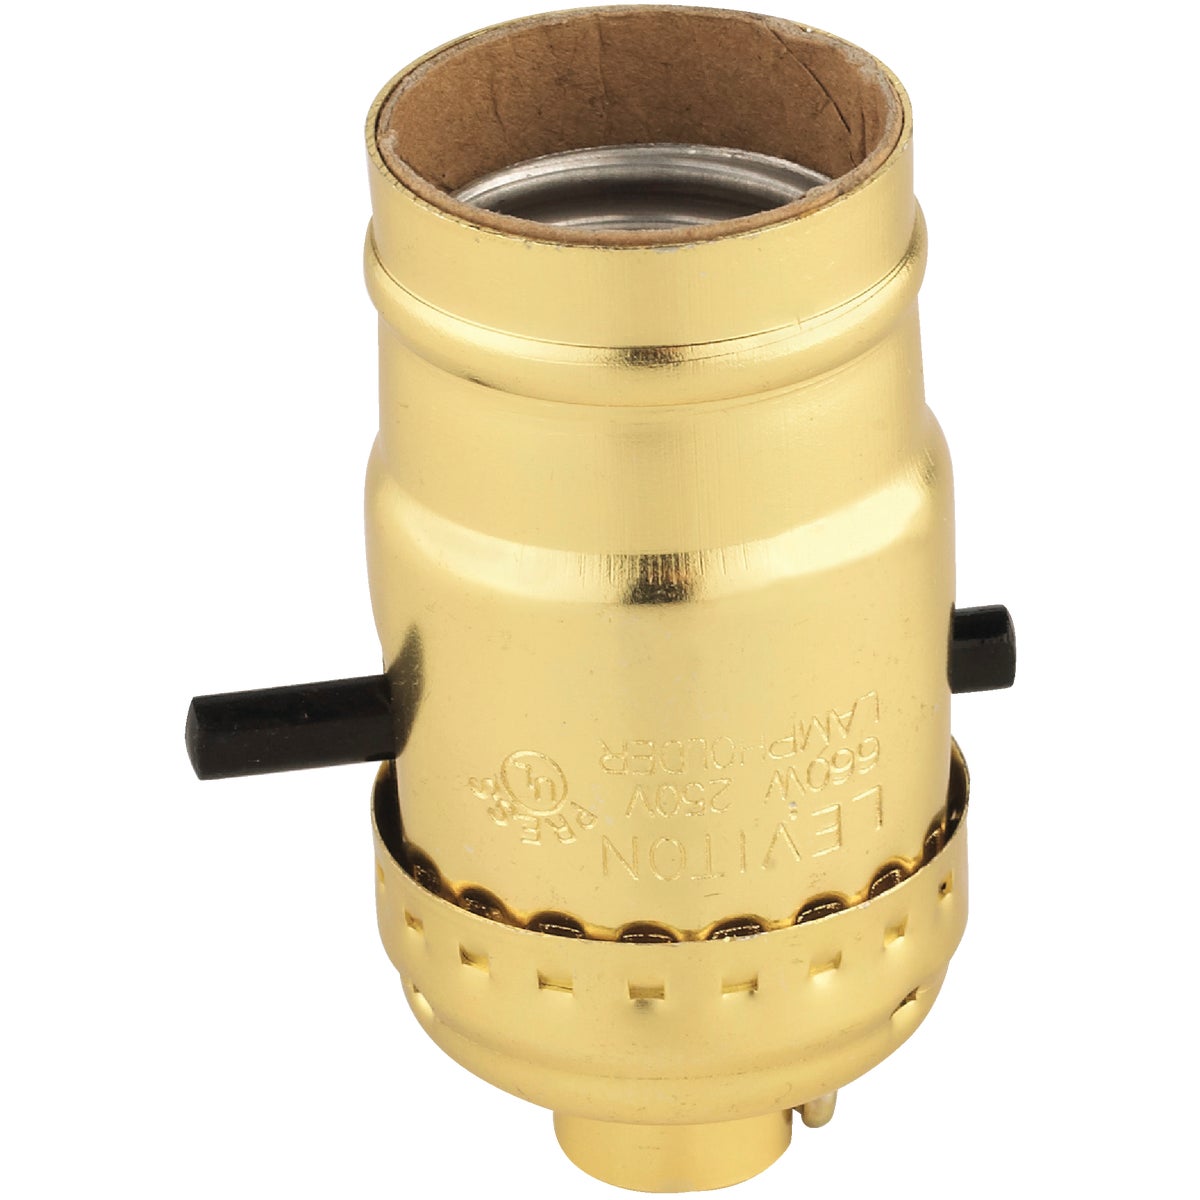 Item 520537, Phenolic interior lamp socket with high heat push-buttons and brass finish